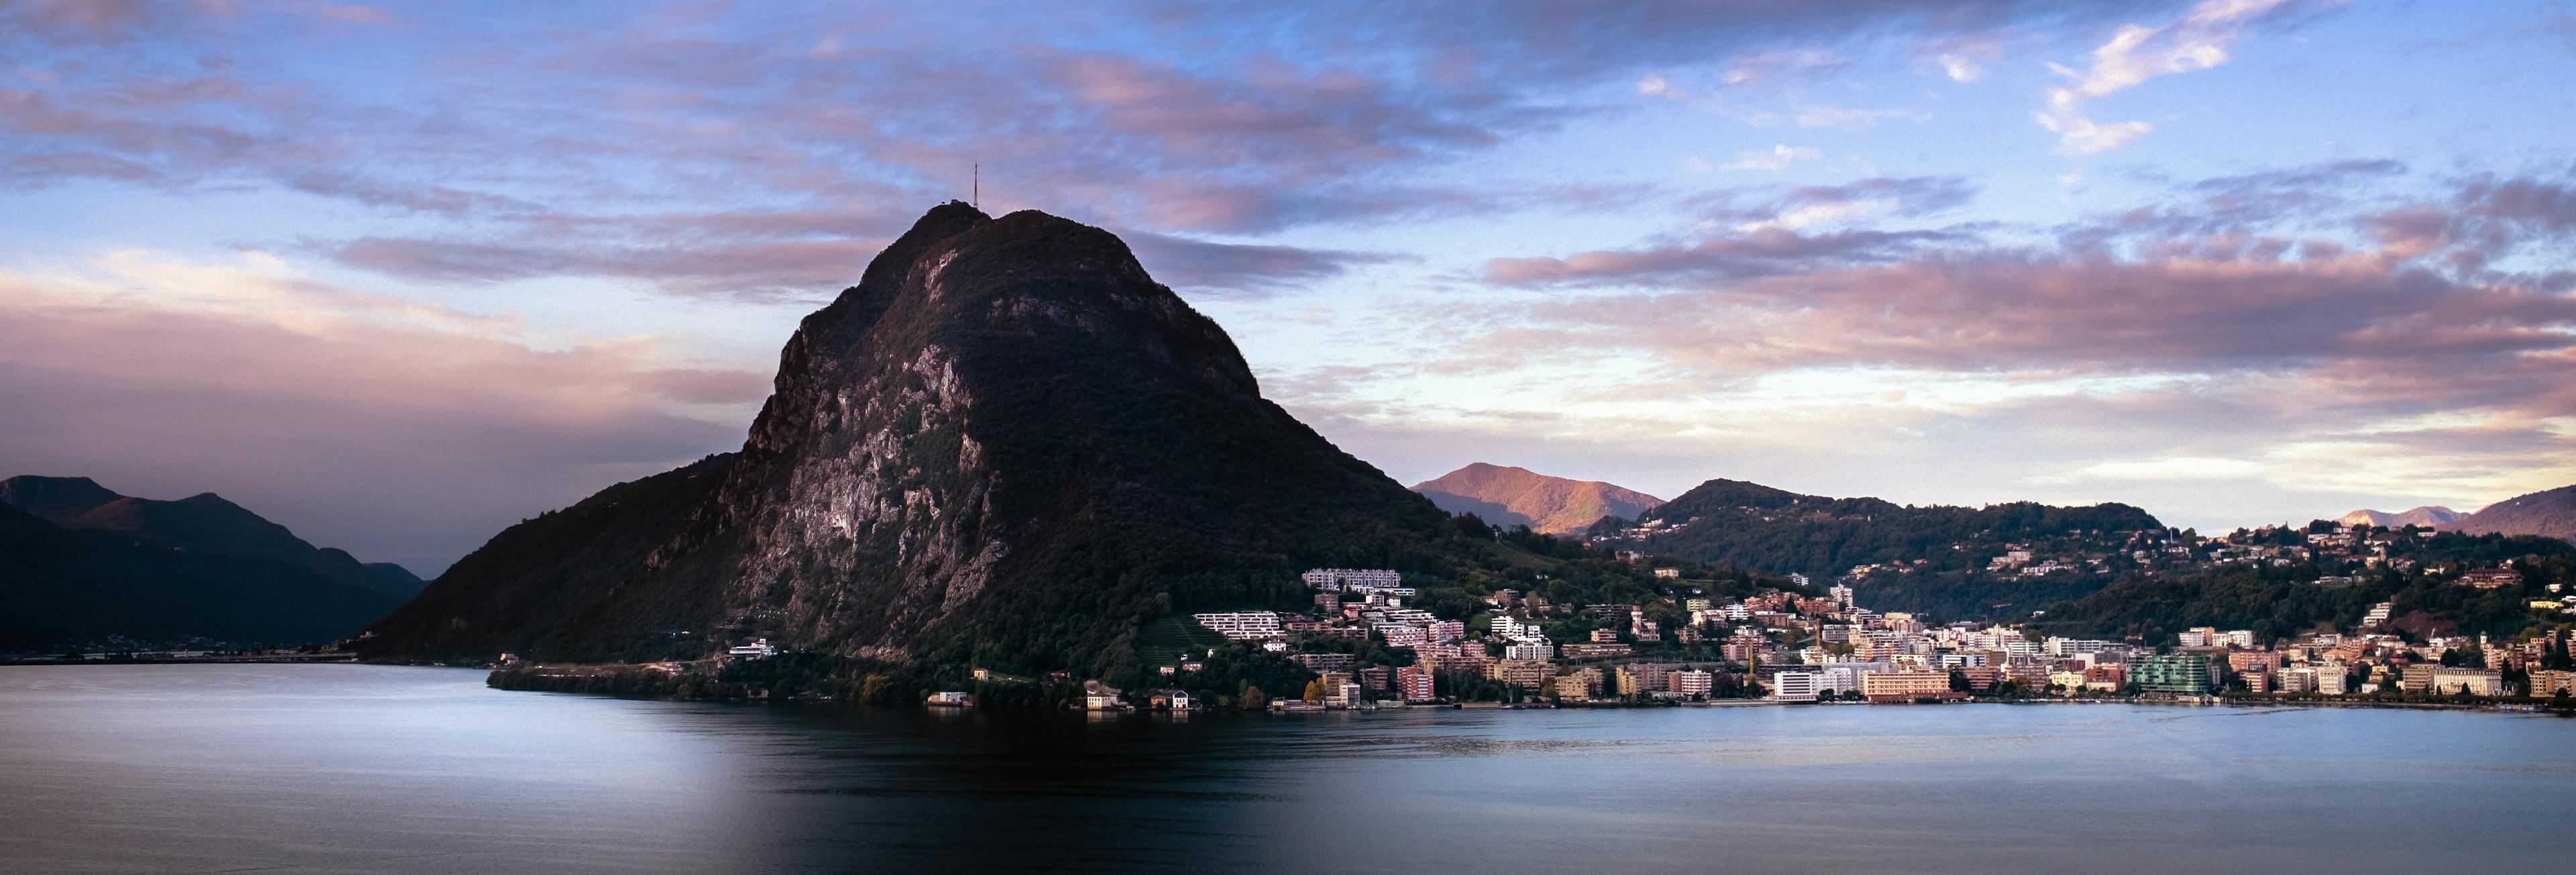 A view of the city of Lugano